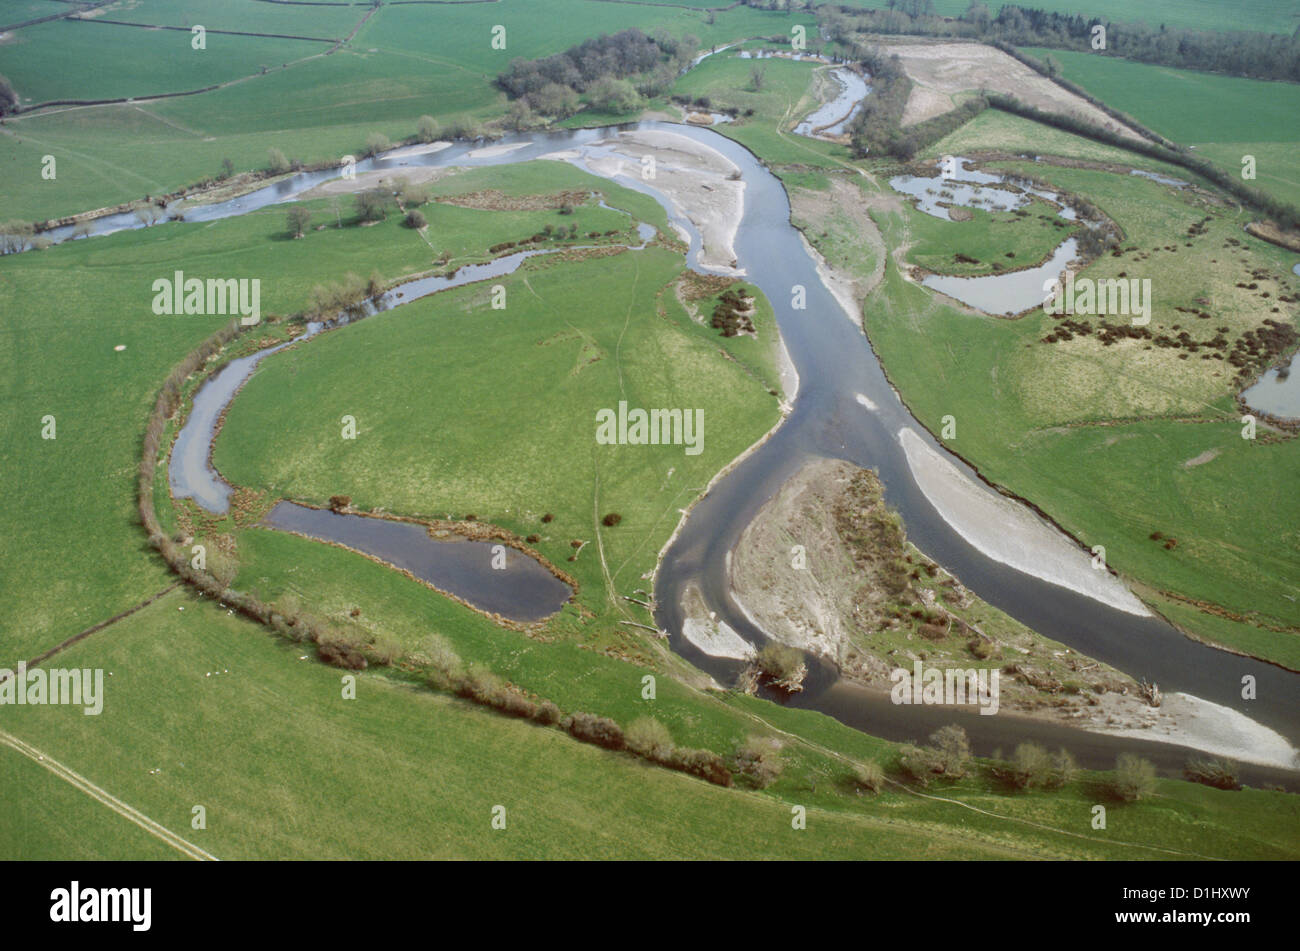 Aerial view of oxbow lake formed when river shortens course, bypassing meander Wales UK Stock Photo